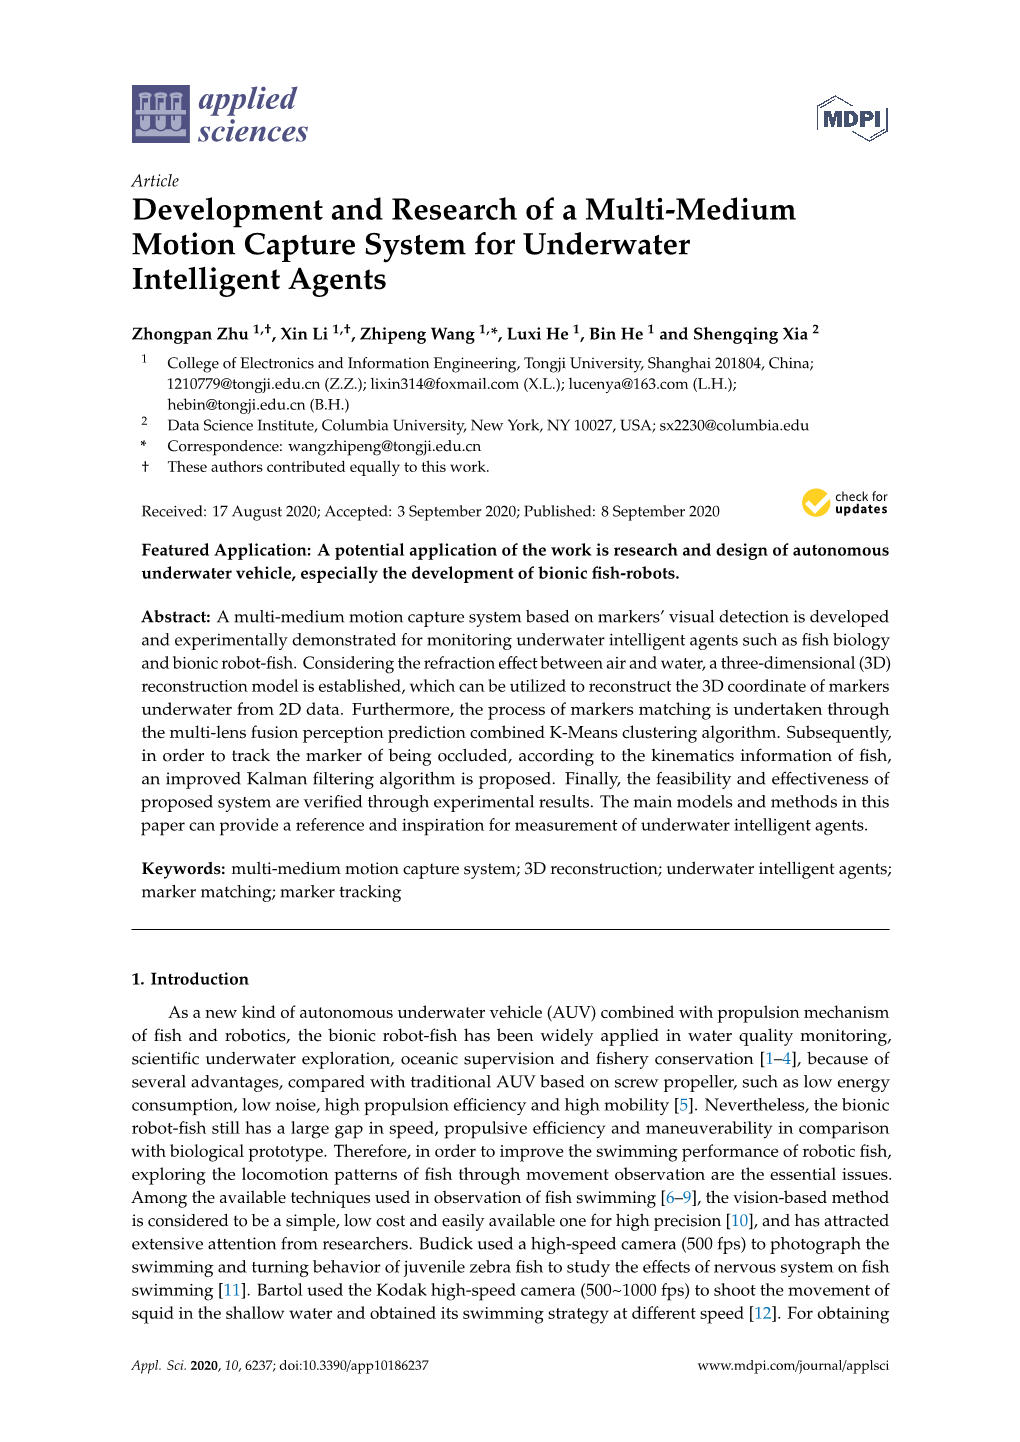 Development and Research of a Multi-Medium Motion Capture System for Underwater Intelligent Agents